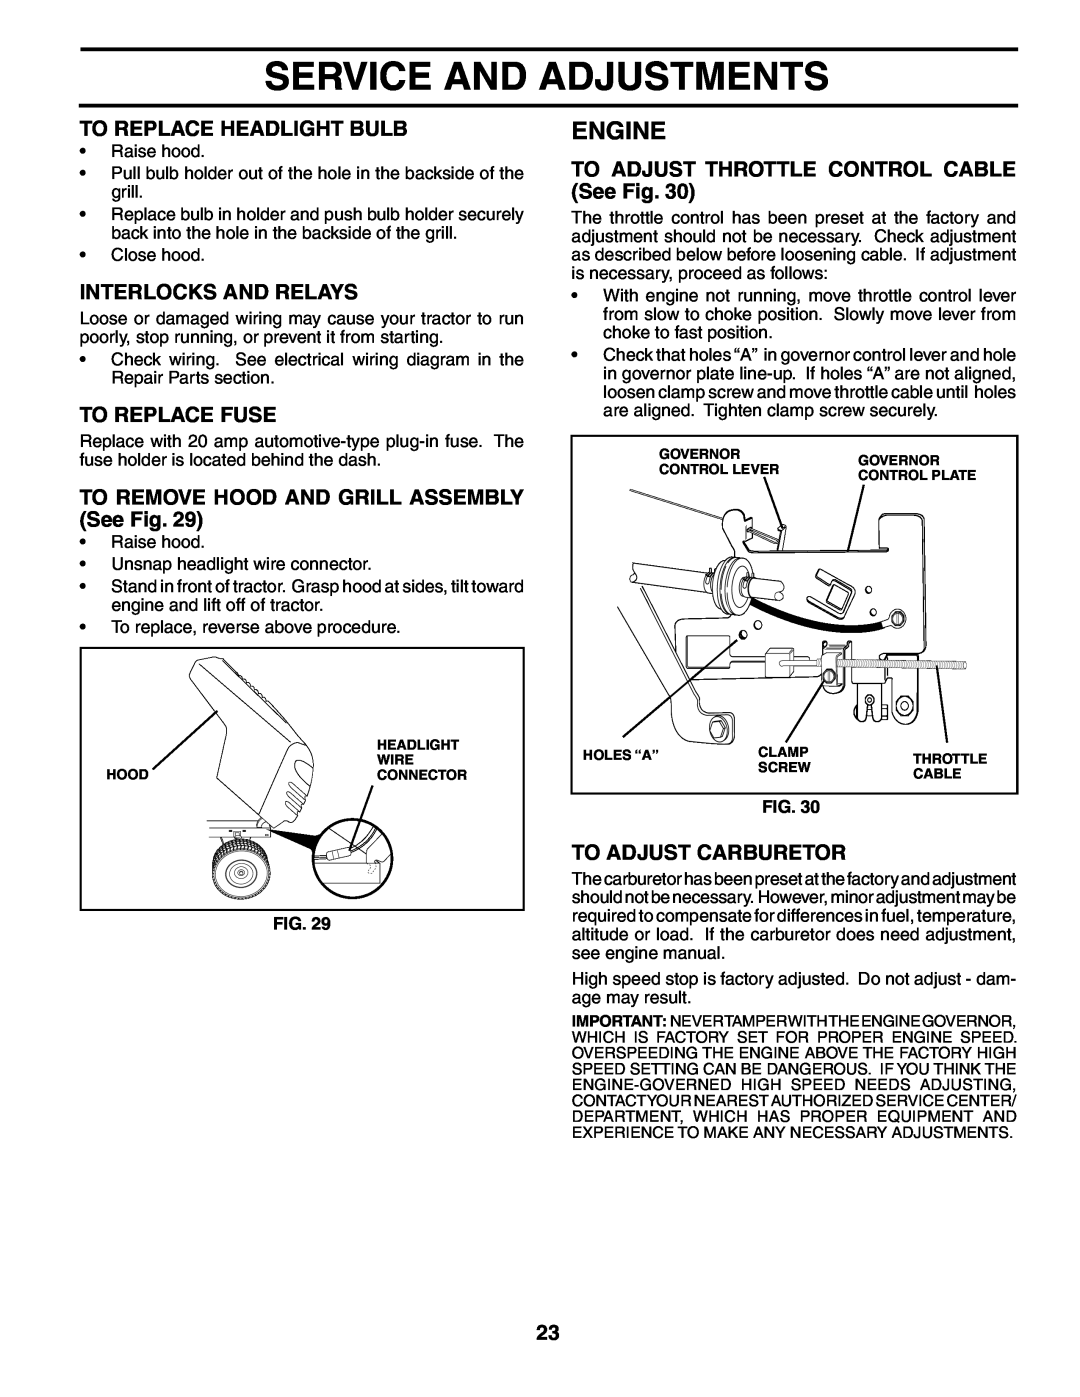 Poulan PO1842STA manual To Replace Headlight Bulb, Interlocks And Relays, To Replace Fuse, To Adjust Carburetor, Engine 